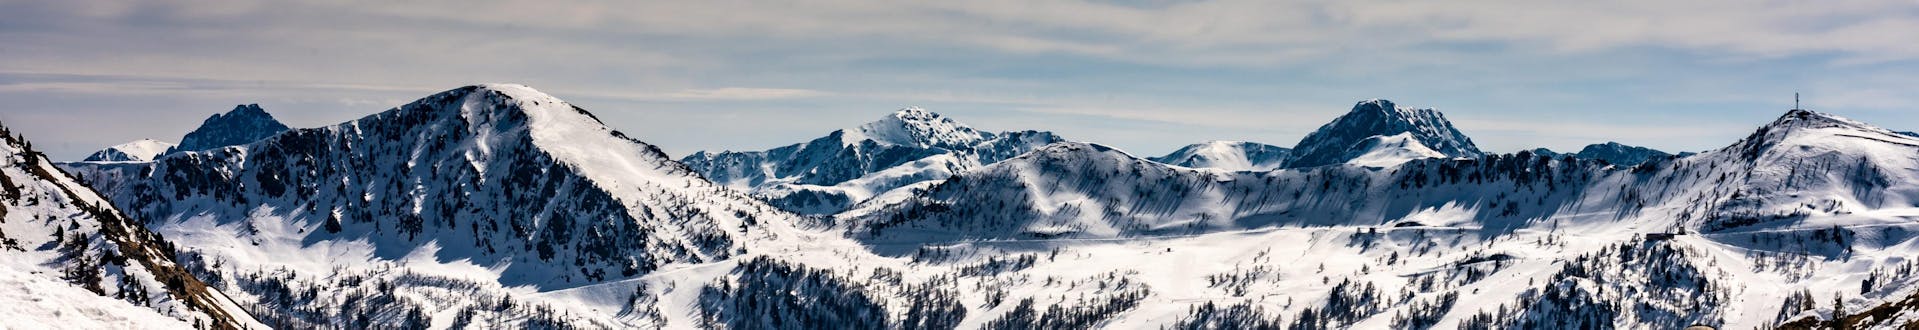 A panoramic view of the mountain peaks in the French ski resort of Isola 2000, where local ski schools offer a variety of ski lessons for people who want to learn to ski.